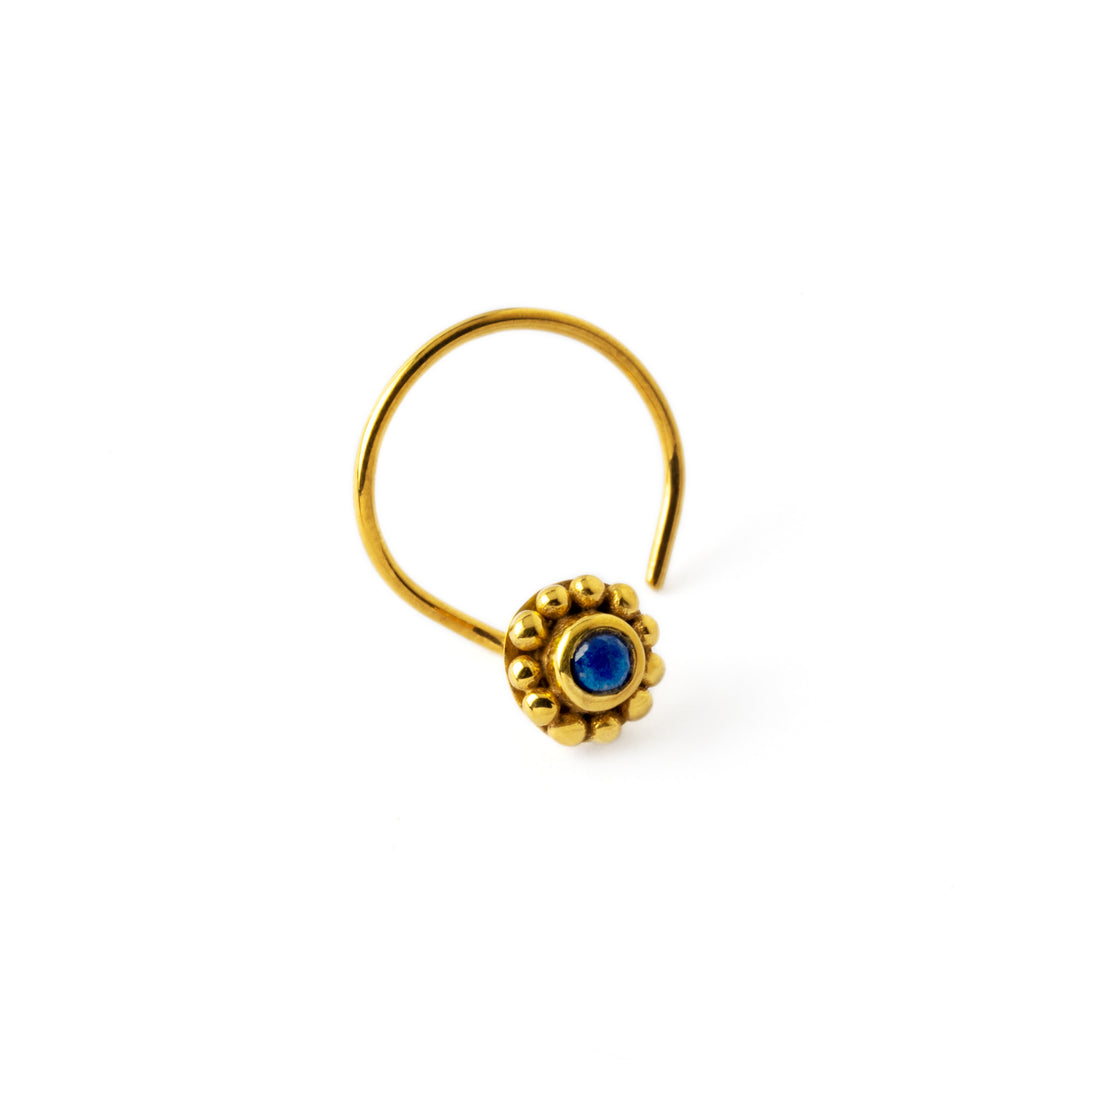 Gold Flower Nose Stud with Lapis right side view